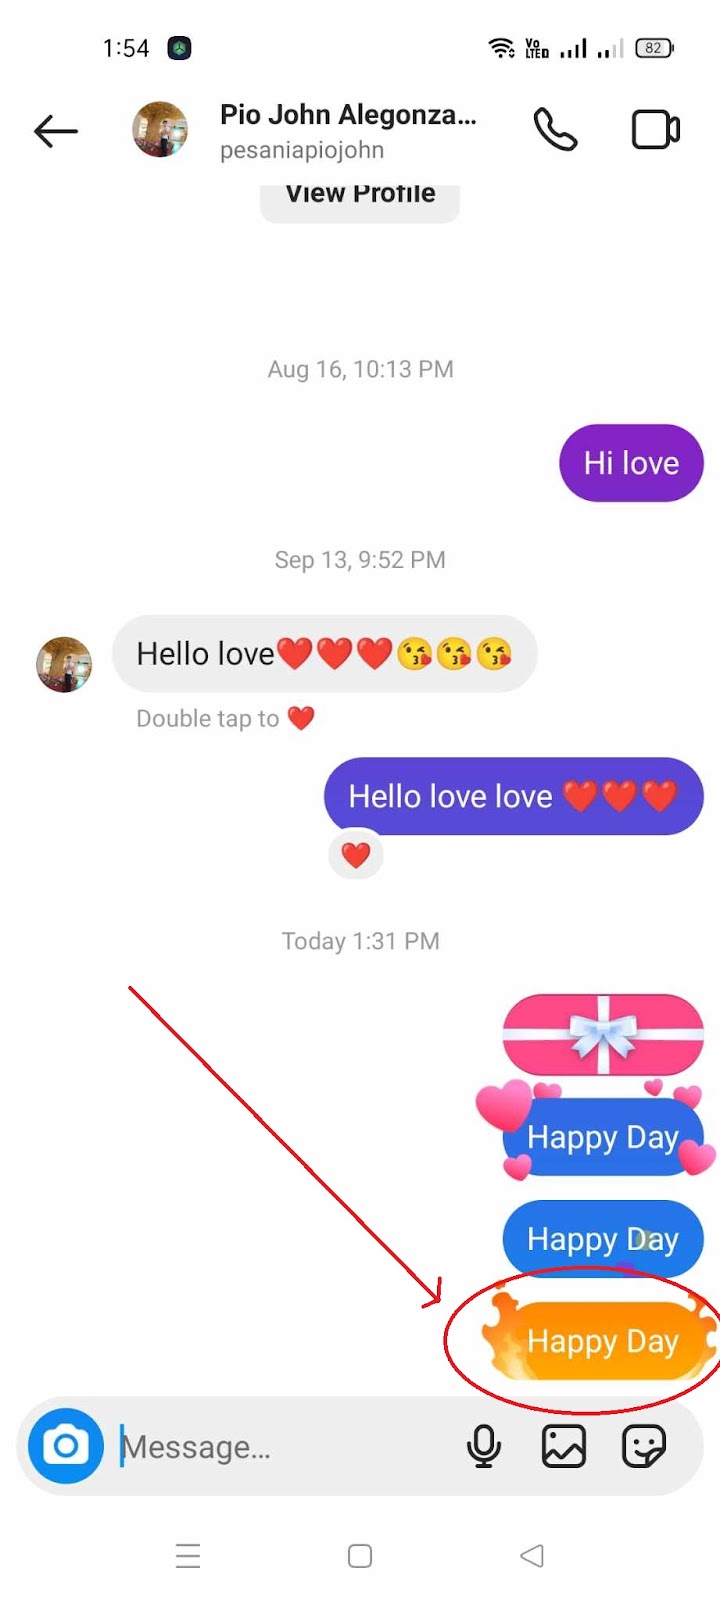 How to Send GIft Messages on Instagram - Fire Effect